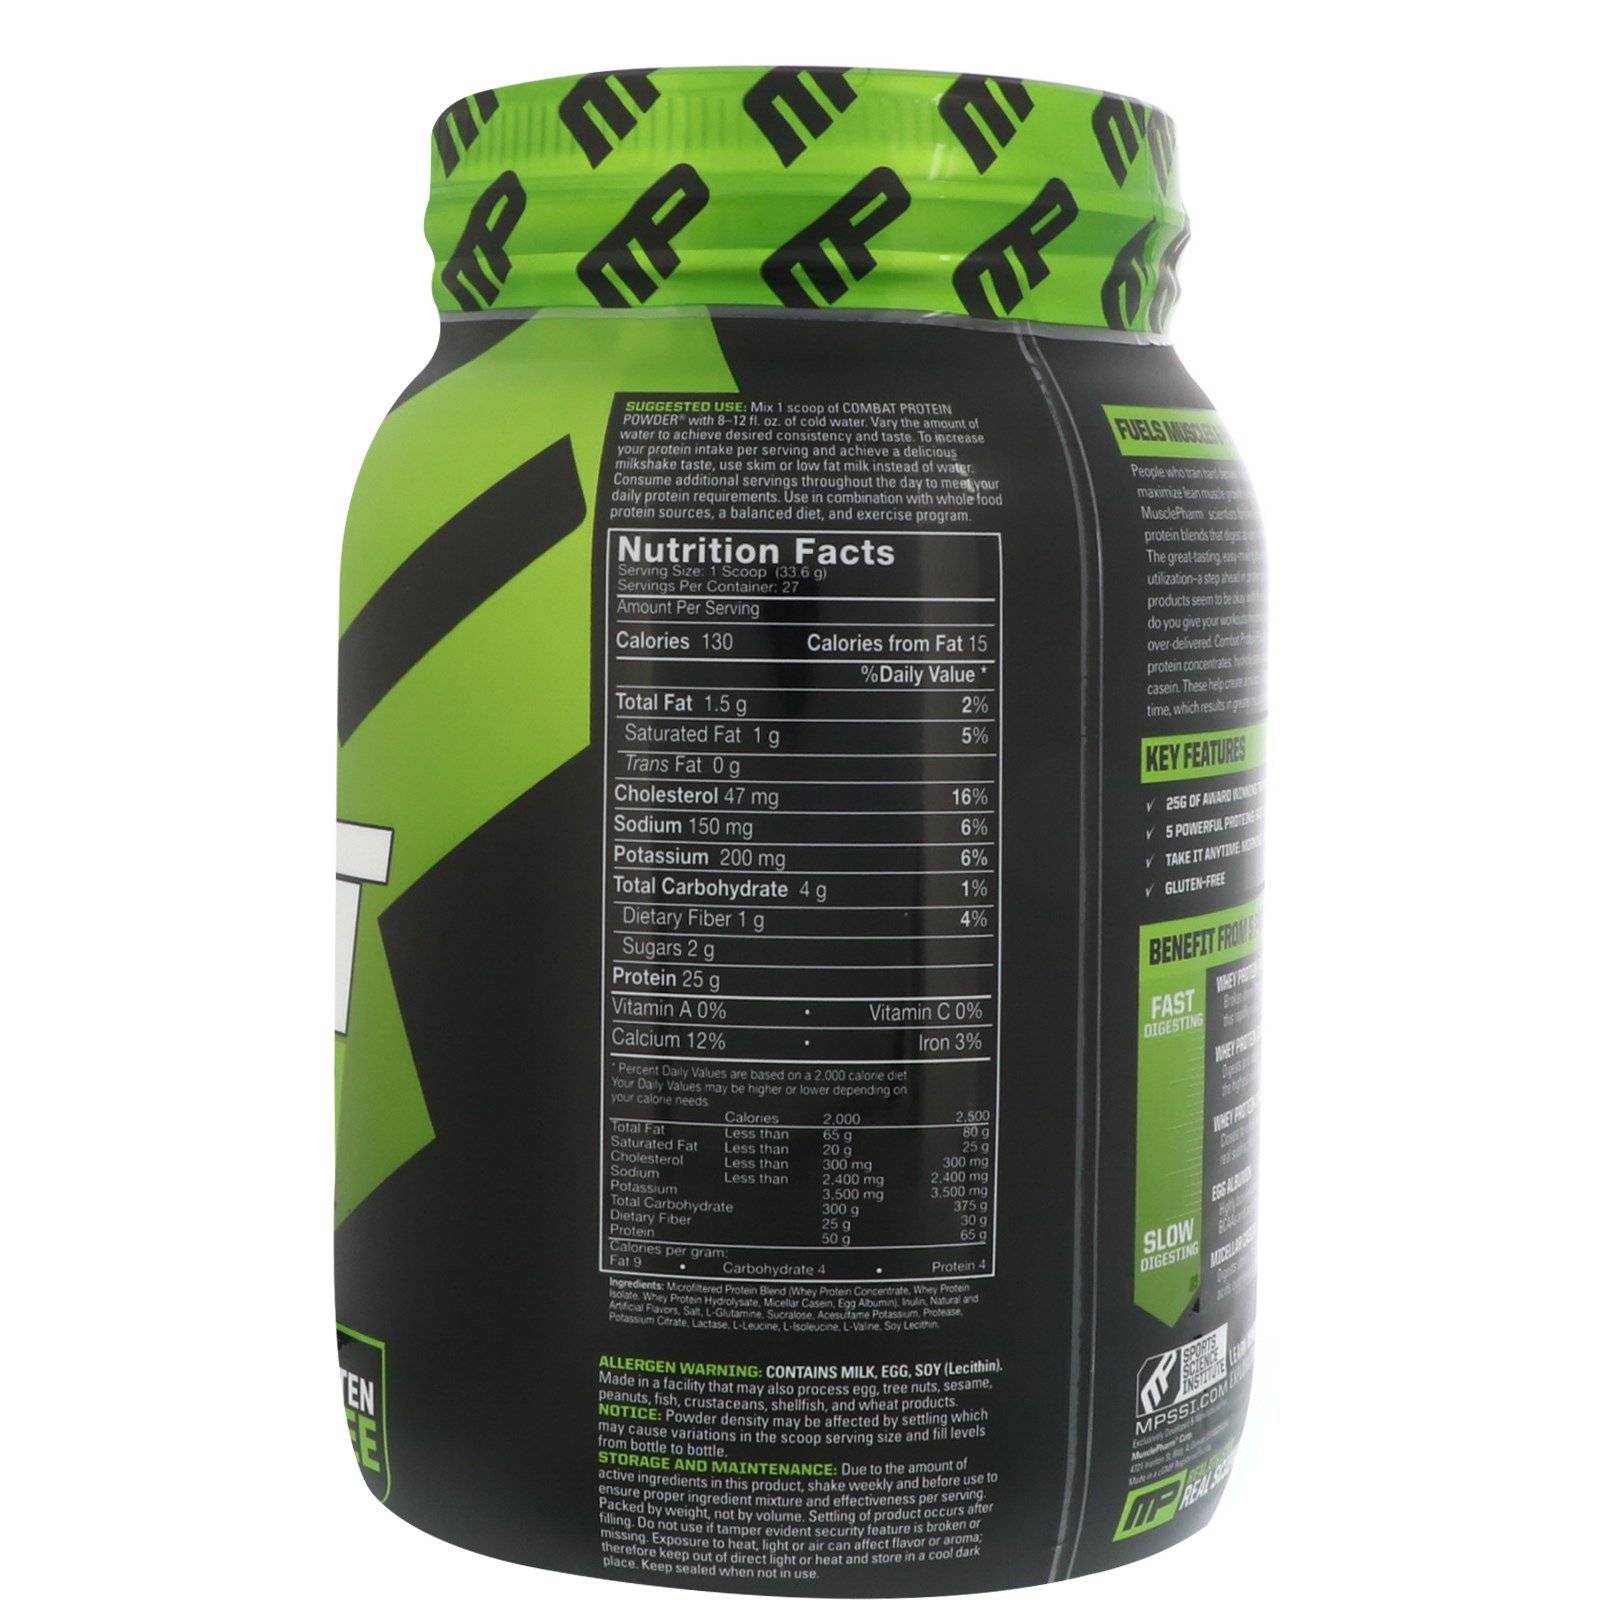 Musclepharm combat protein powder review - bombard your muscles from all angles - best 5 supplements